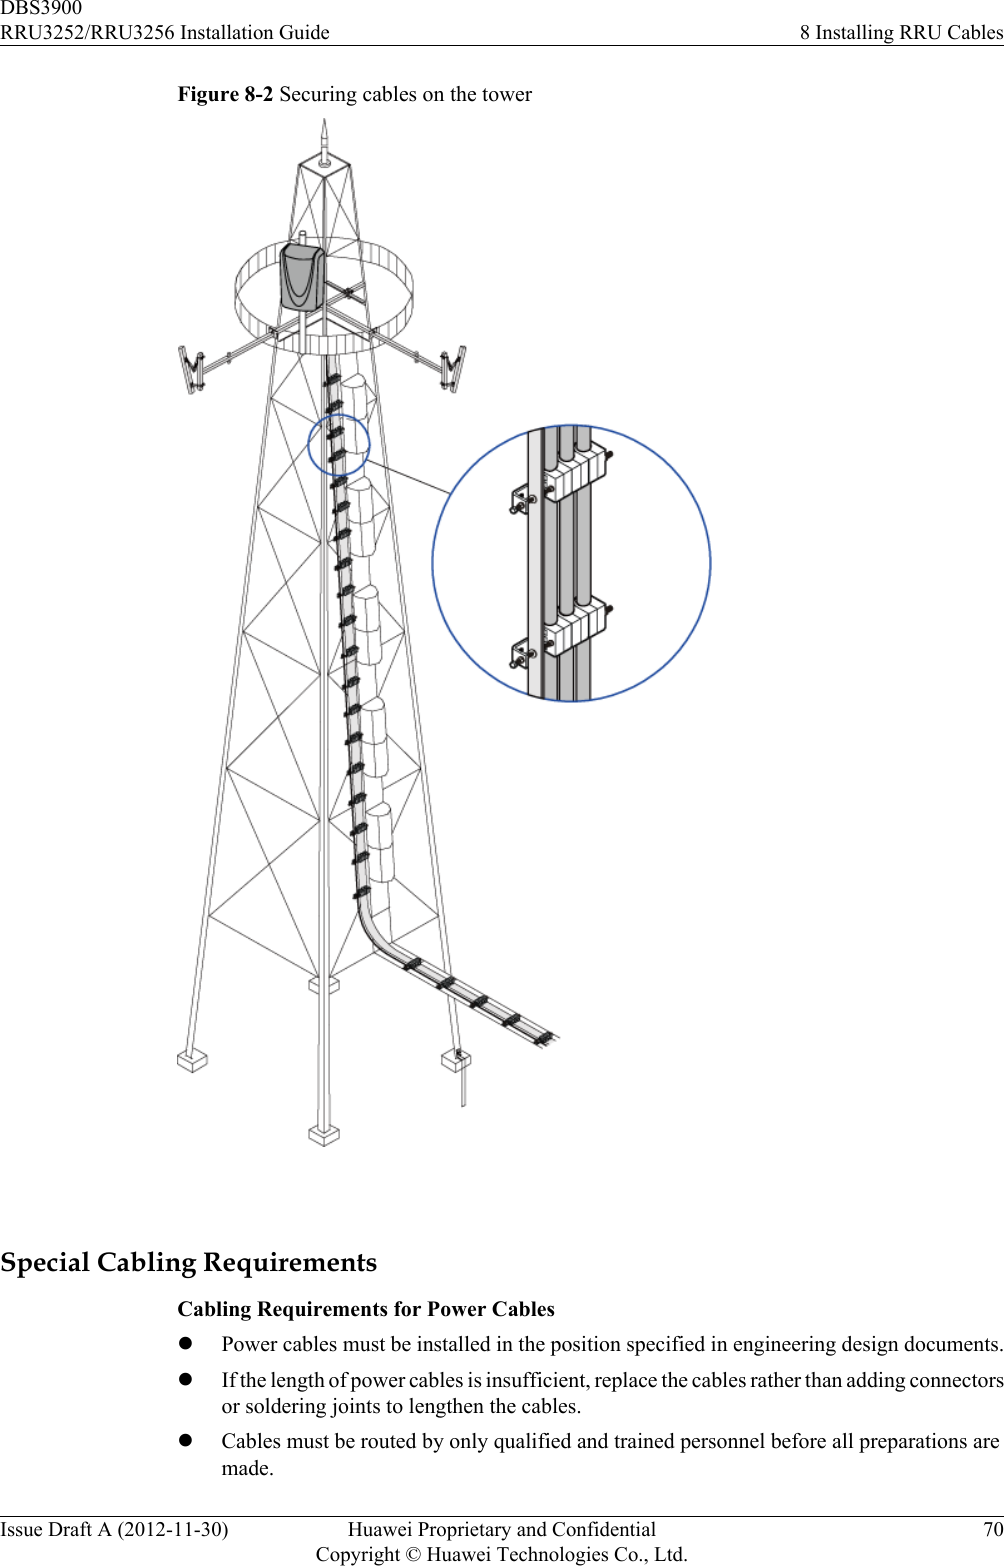 Figure 8-2 Securing cables on the tower Special Cabling RequirementsCabling Requirements for Power CableslPower cables must be installed in the position specified in engineering design documents.lIf the length of power cables is insufficient, replace the cables rather than adding connectorsor soldering joints to lengthen the cables.lCables must be routed by only qualified and trained personnel before all preparations aremade.DBS3900RRU3252/RRU3256 Installation Guide 8 Installing RRU CablesIssue Draft A (2012-11-30) Huawei Proprietary and ConfidentialCopyright © Huawei Technologies Co., Ltd.70